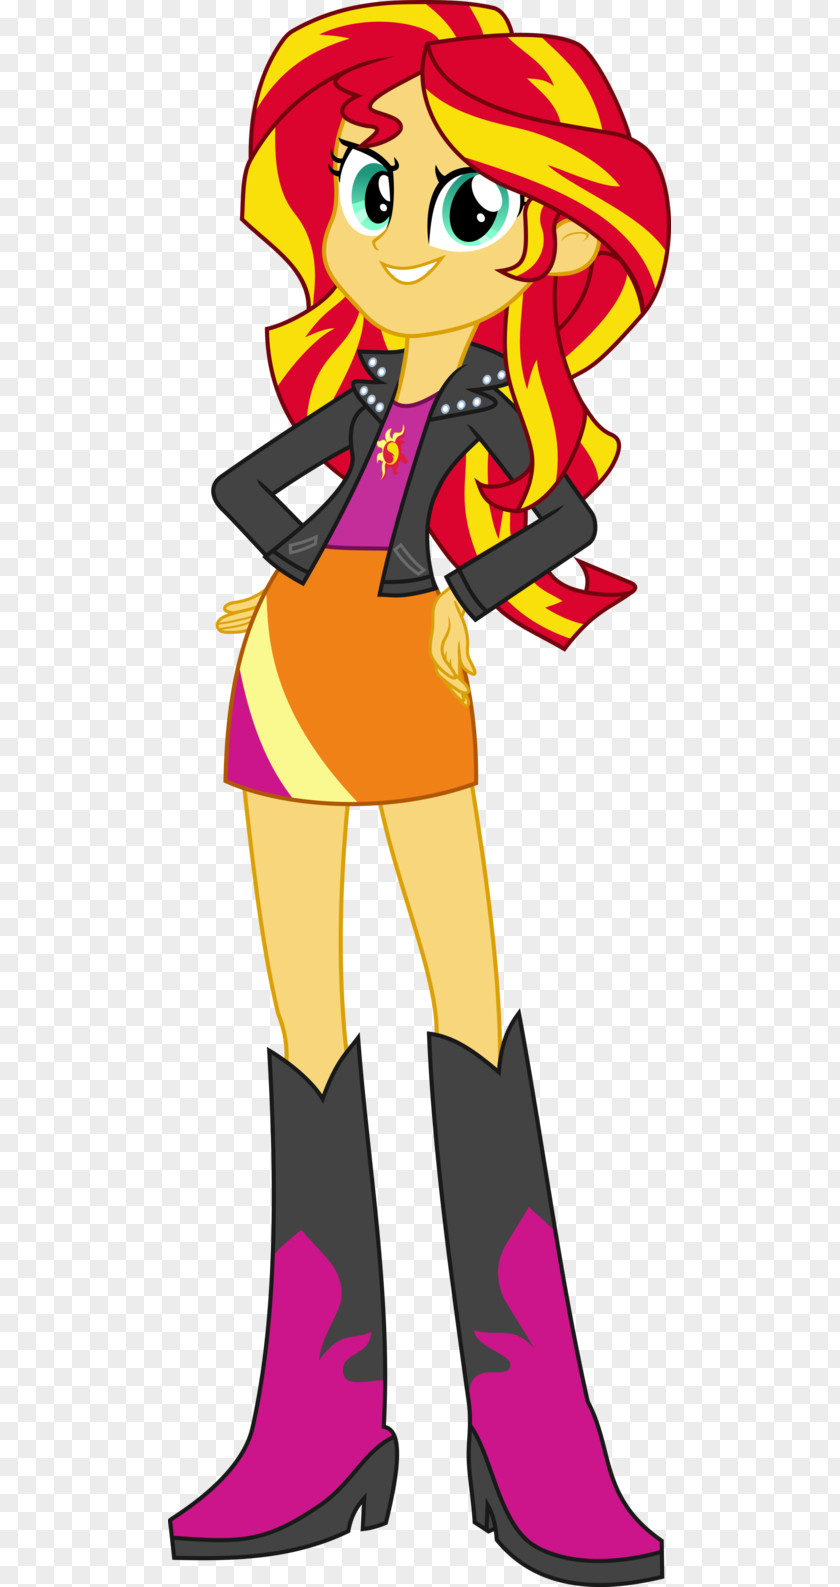 Rarity Sunset Shimmer Twilight Sparkle Rainbow Dash My Little Pony: Equestria Girls PNG